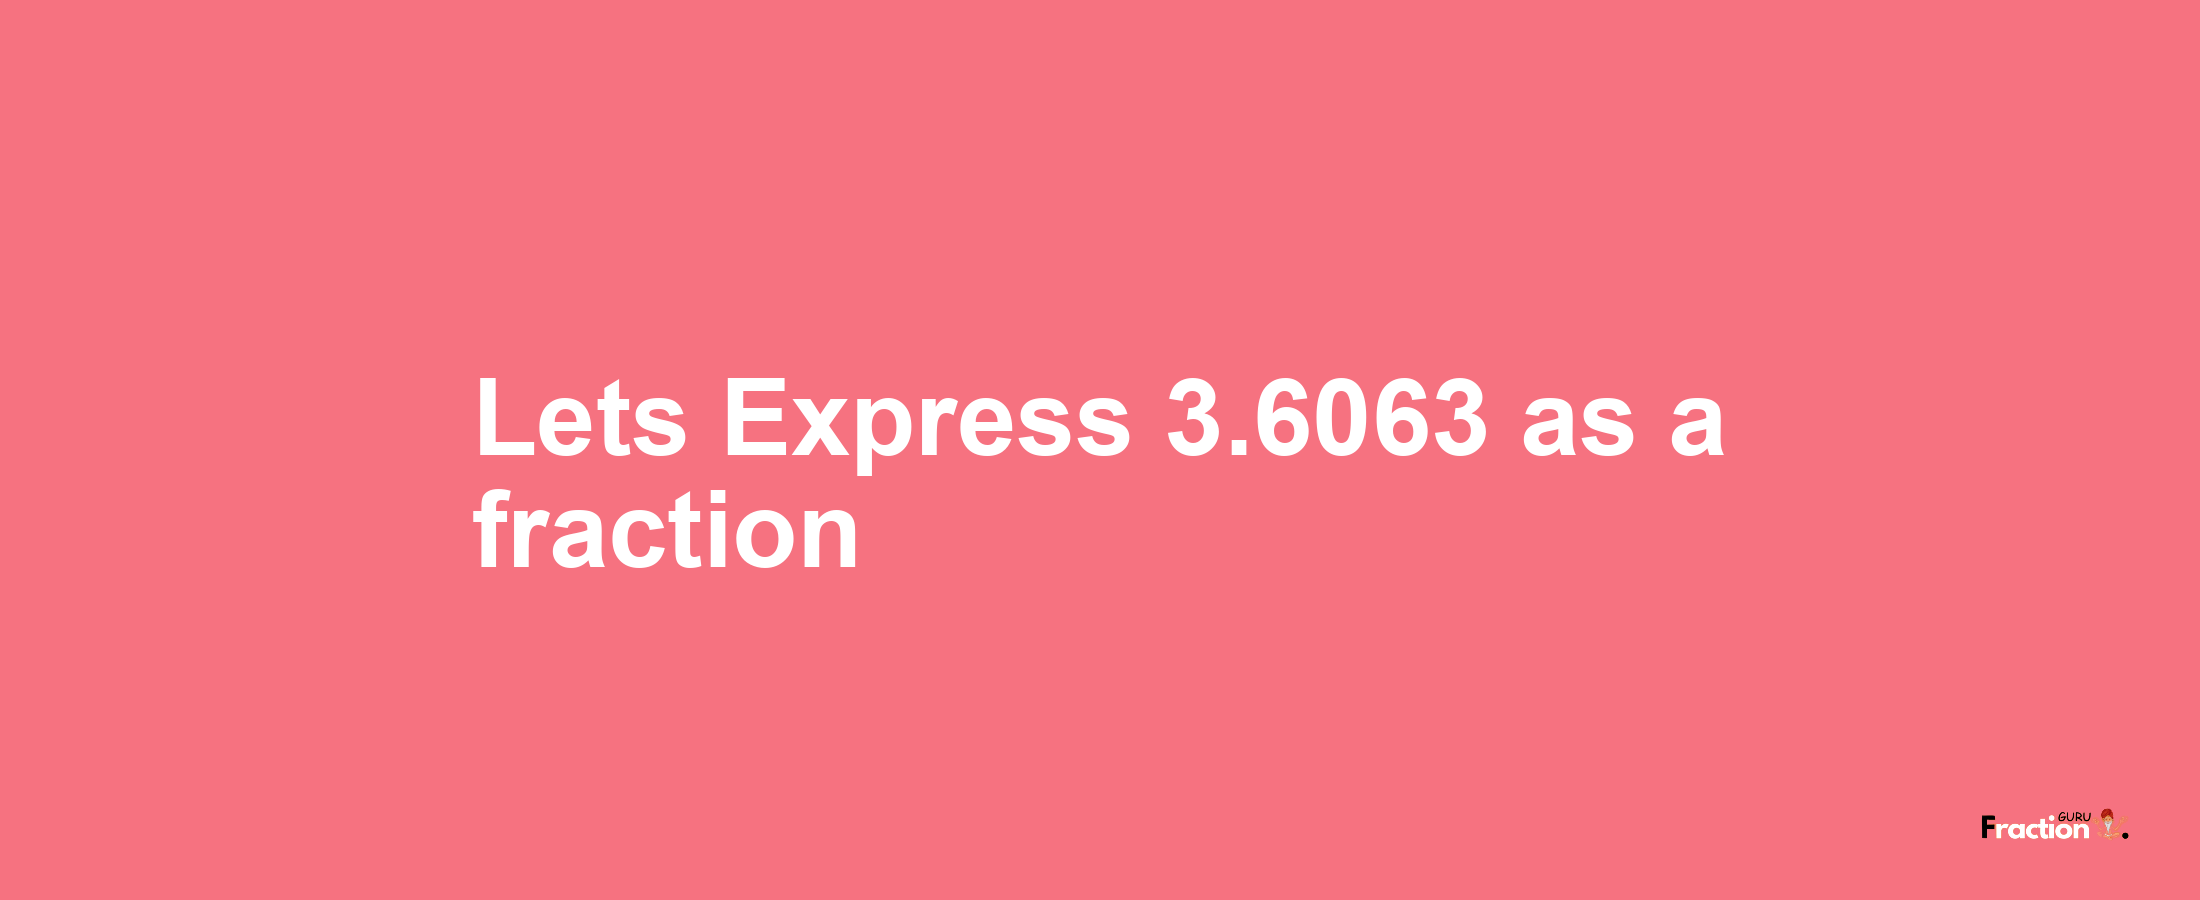 Lets Express 3.6063 as afraction